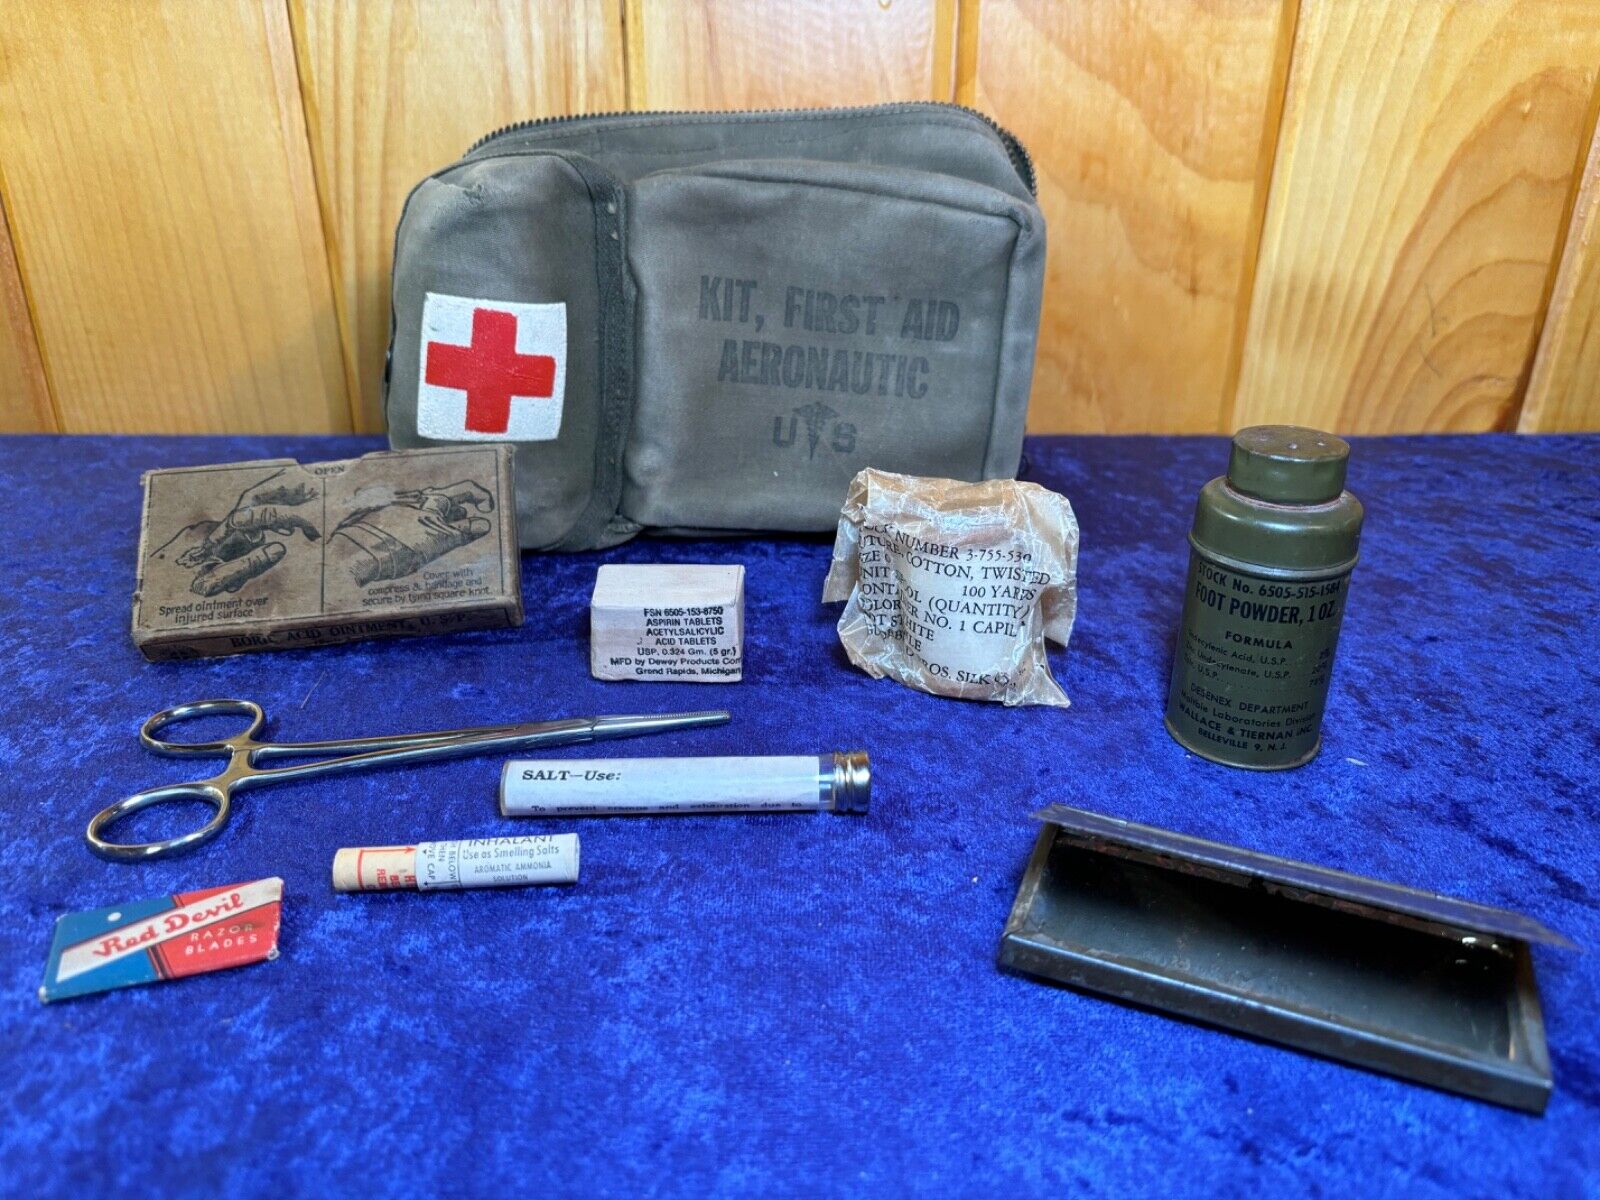 Vintage ww2/korea medical kit with some contents